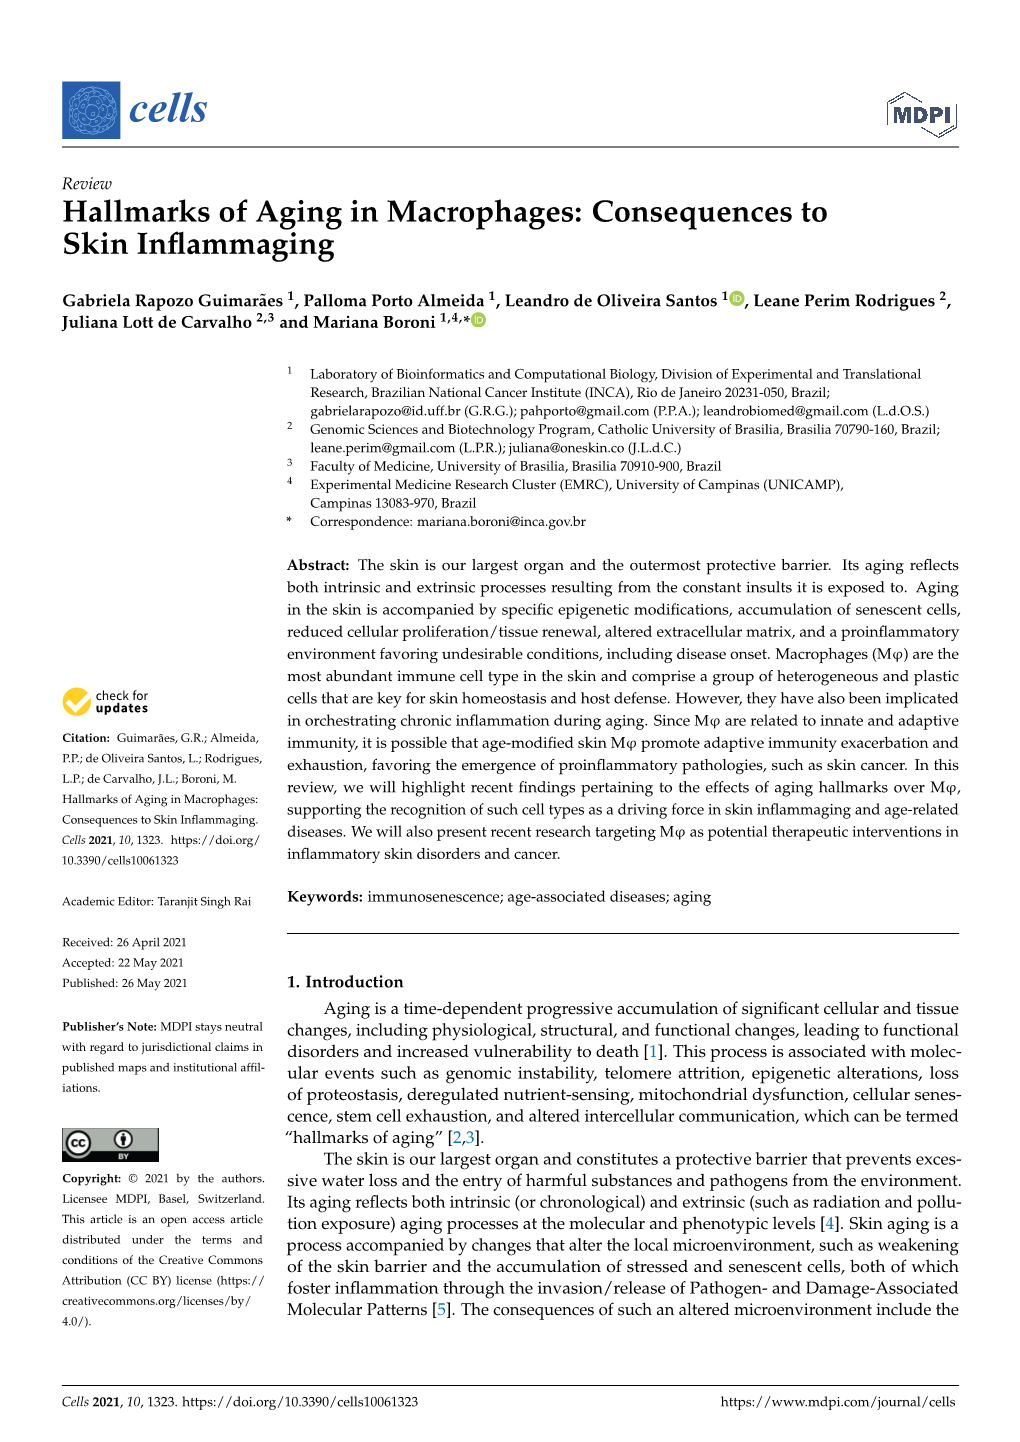 Hallmarks of Aging in Macrophages: Consequences to Skin Inflammaging